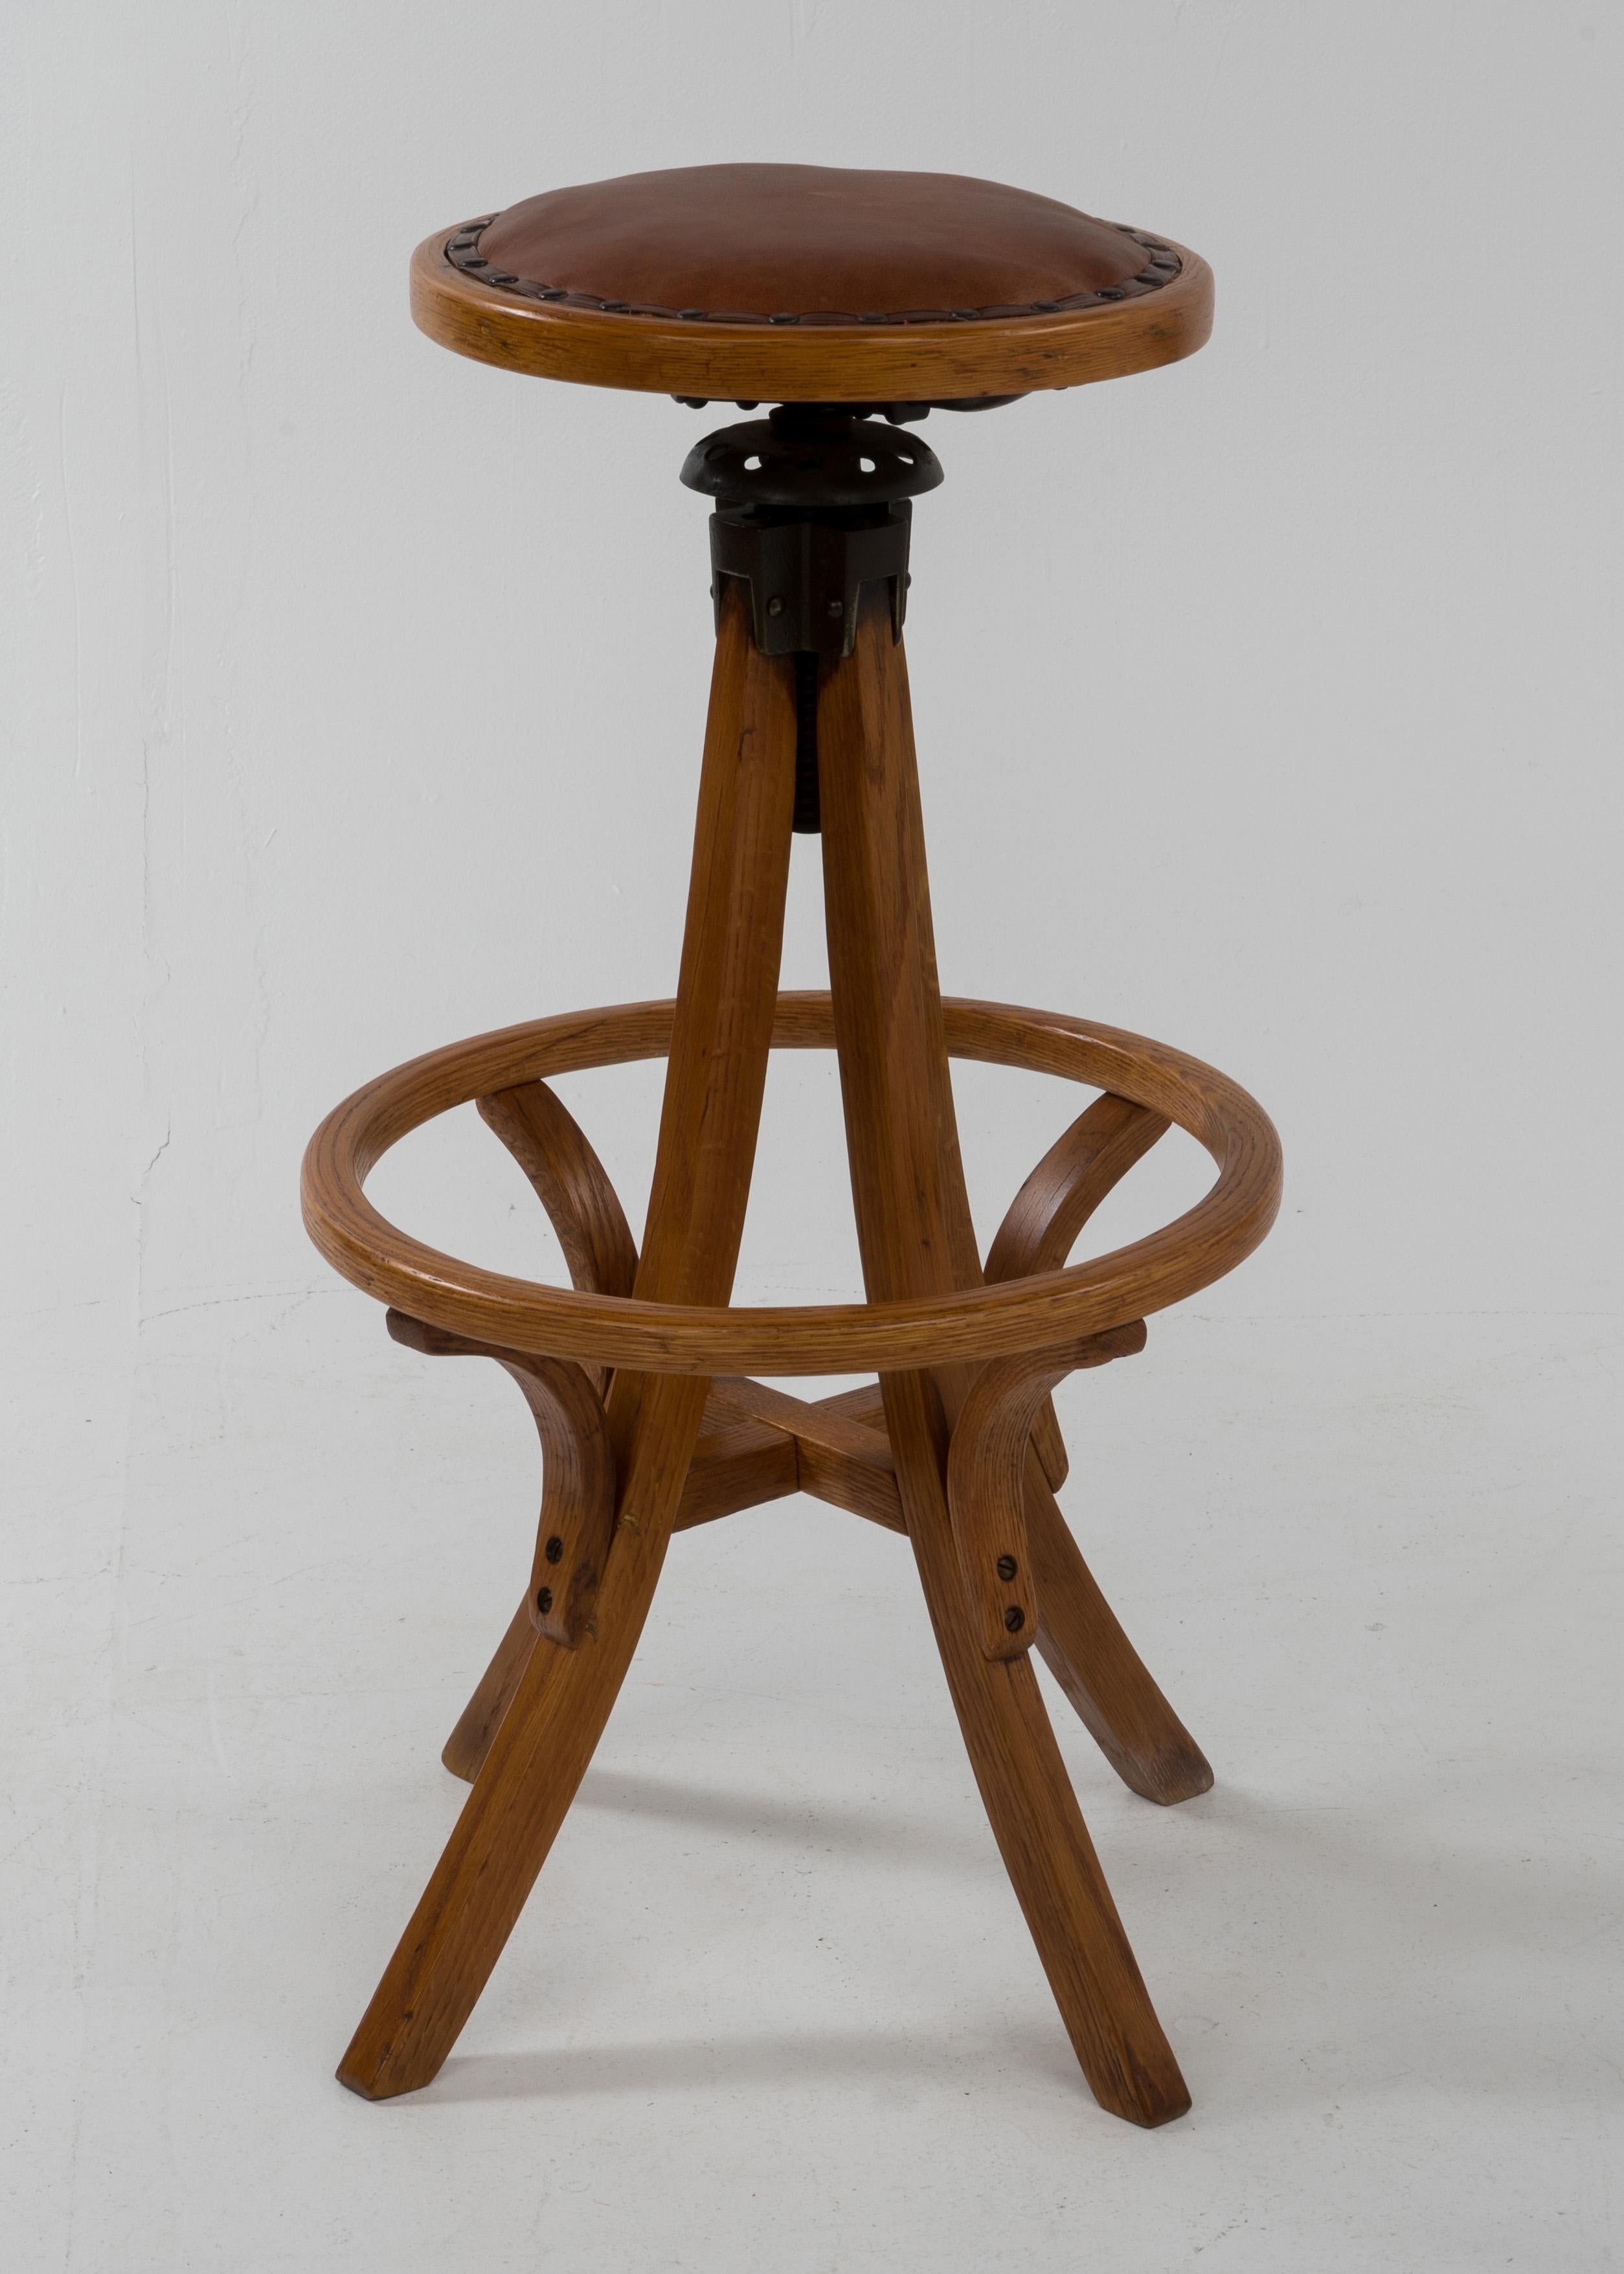 American Early 20th Century Antique Architect Architectural Industrial Oak Drafting Stool